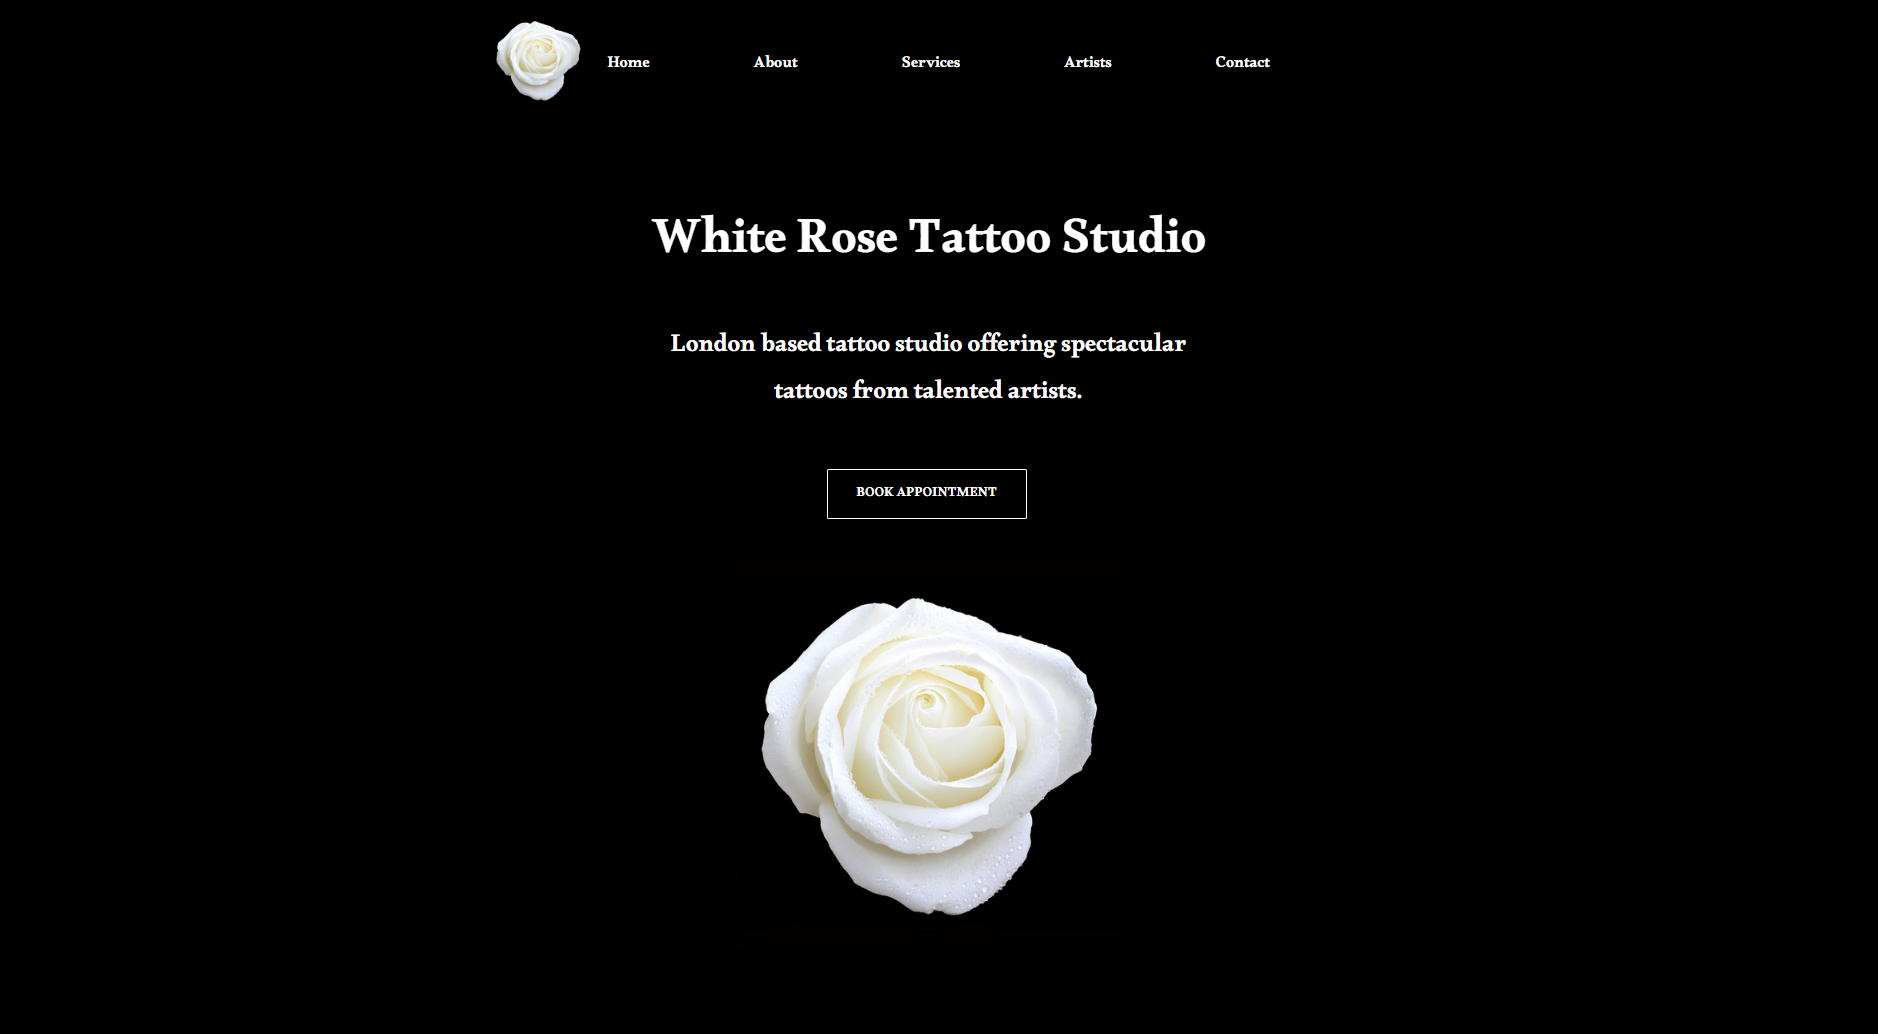 A Tattoo website made by Two Crows Web Development